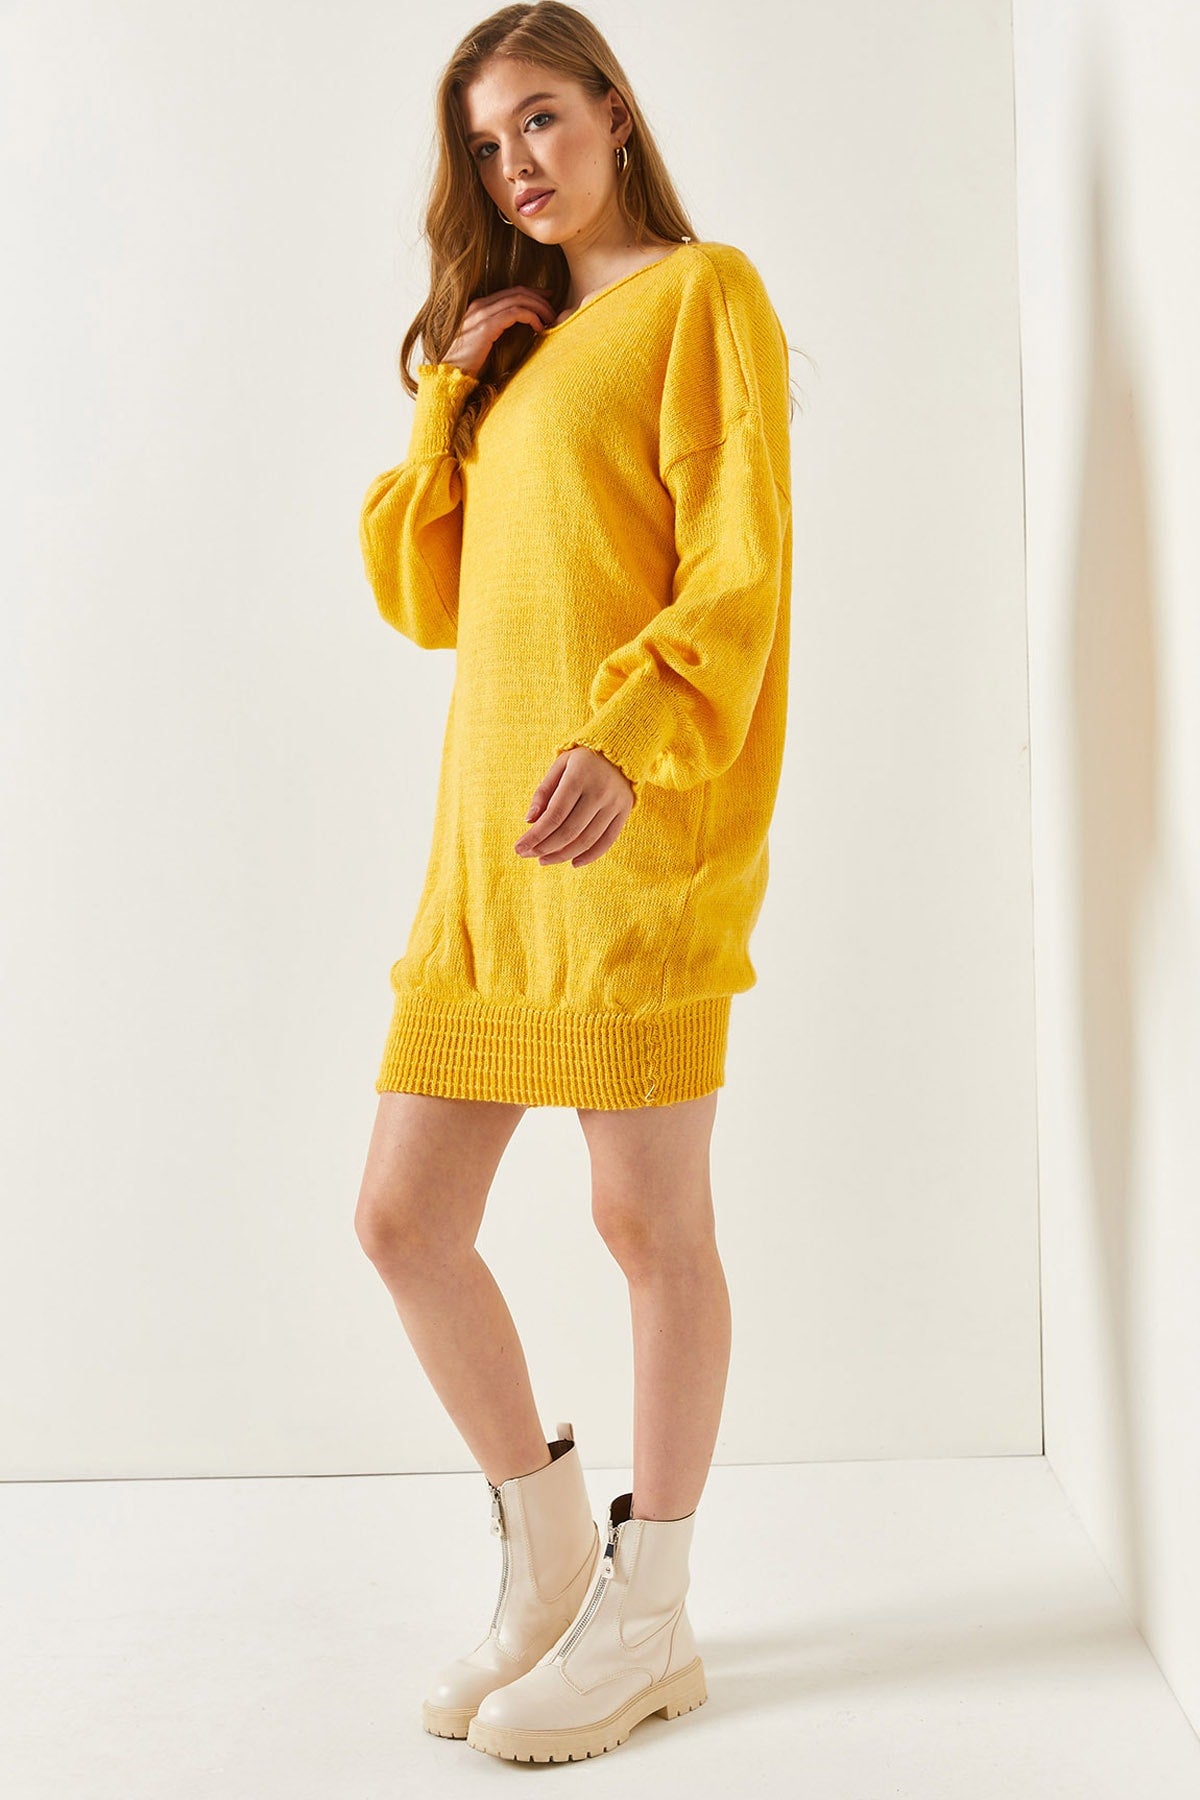 WOMEN'S YELLOW HAND AND SPEP TYPE RED TICKO DRESS ARM-22Y012029